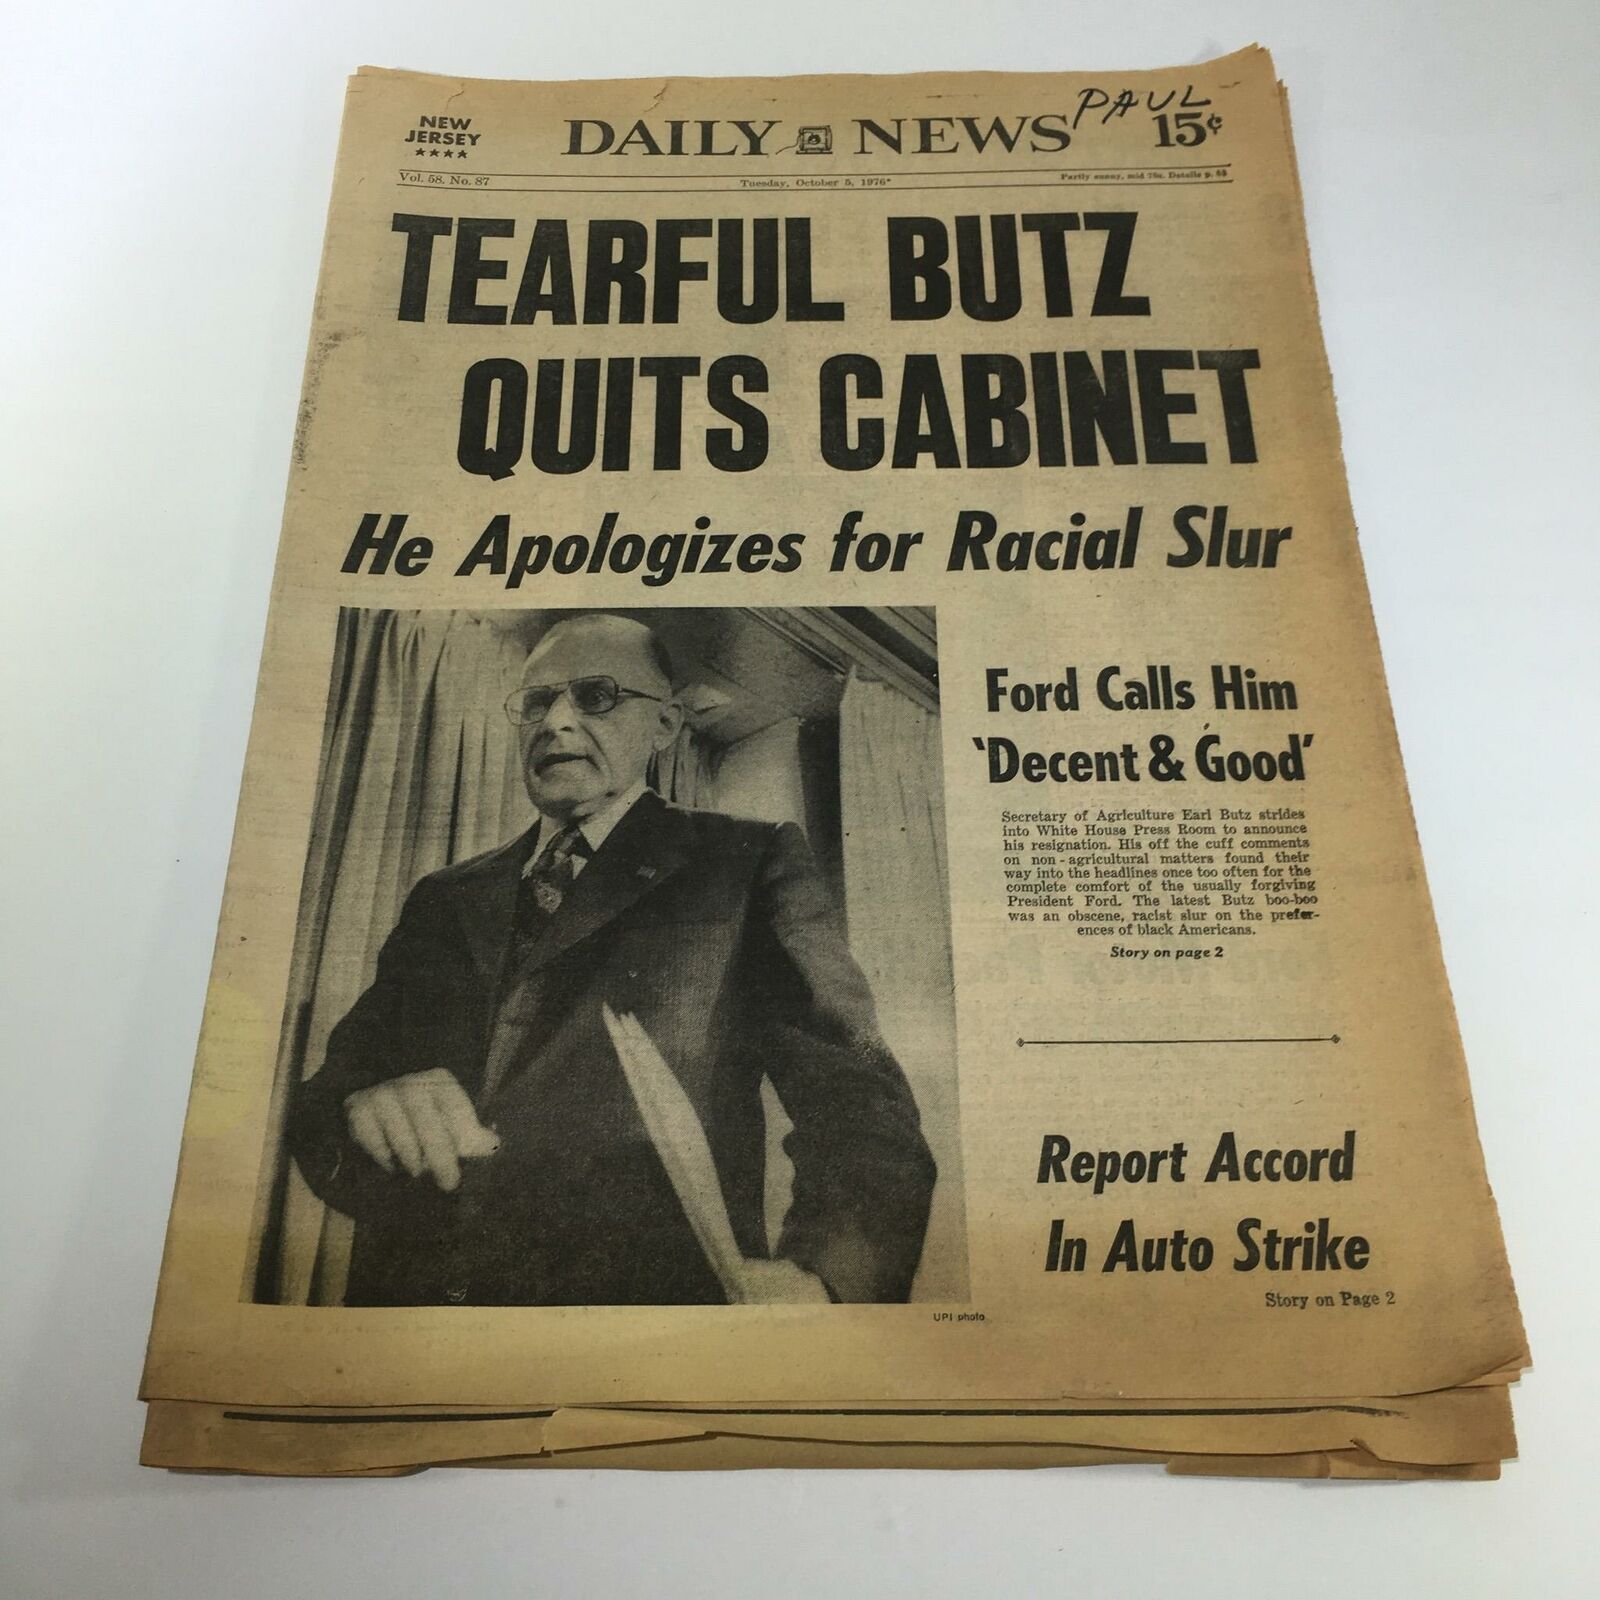 NY Daily News: 10/5/76 Tearful Butz Quits Cabinet Sec. Of Agriculture Earl Butz